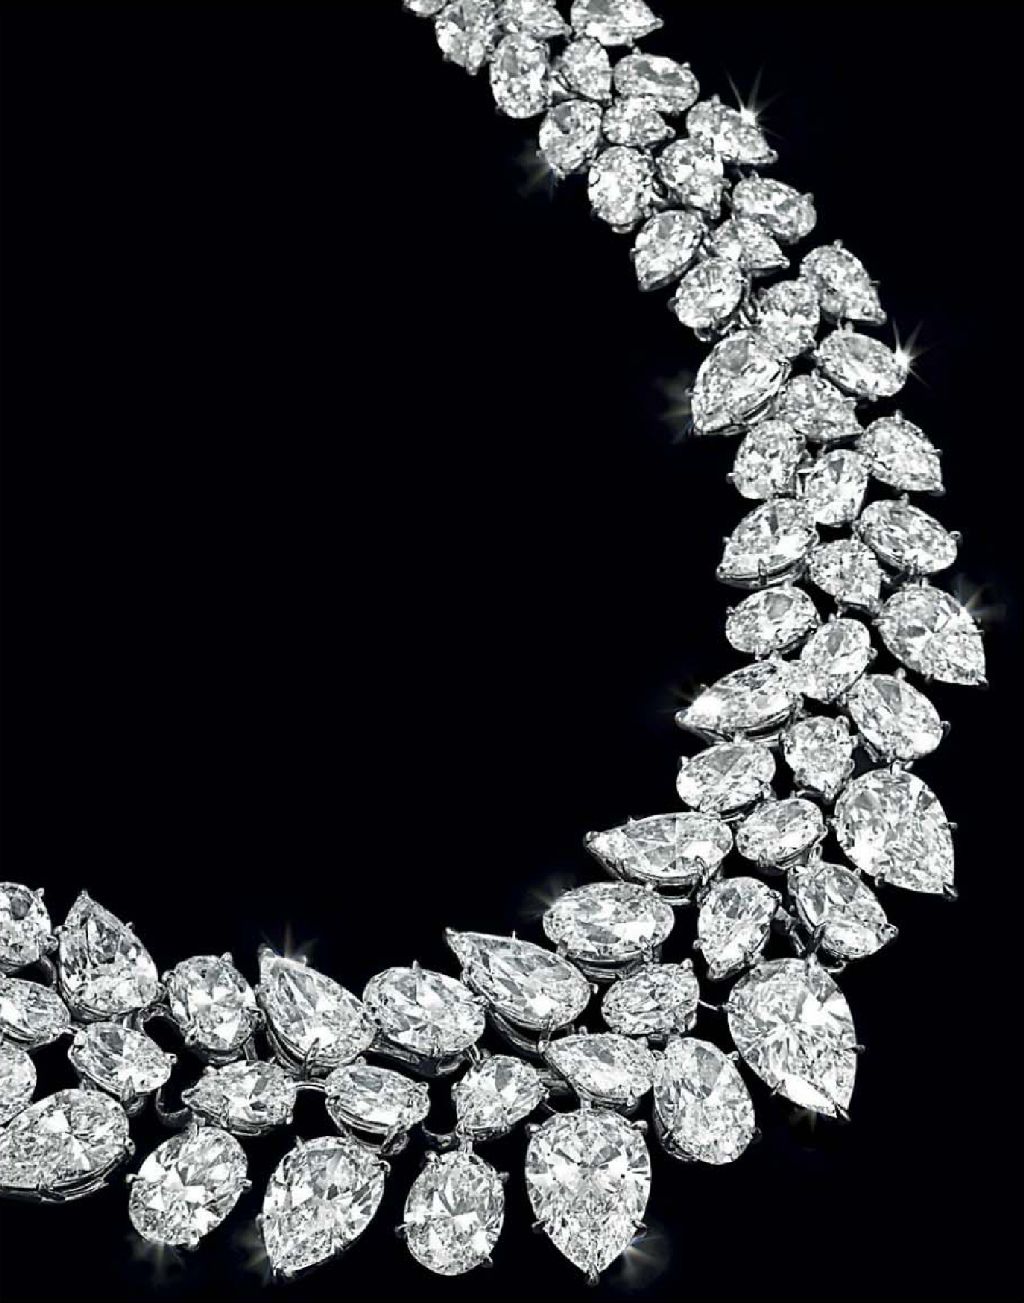 William Goldberg Diamond Necklace Auctioned at Christieâ€™s for $1.8M